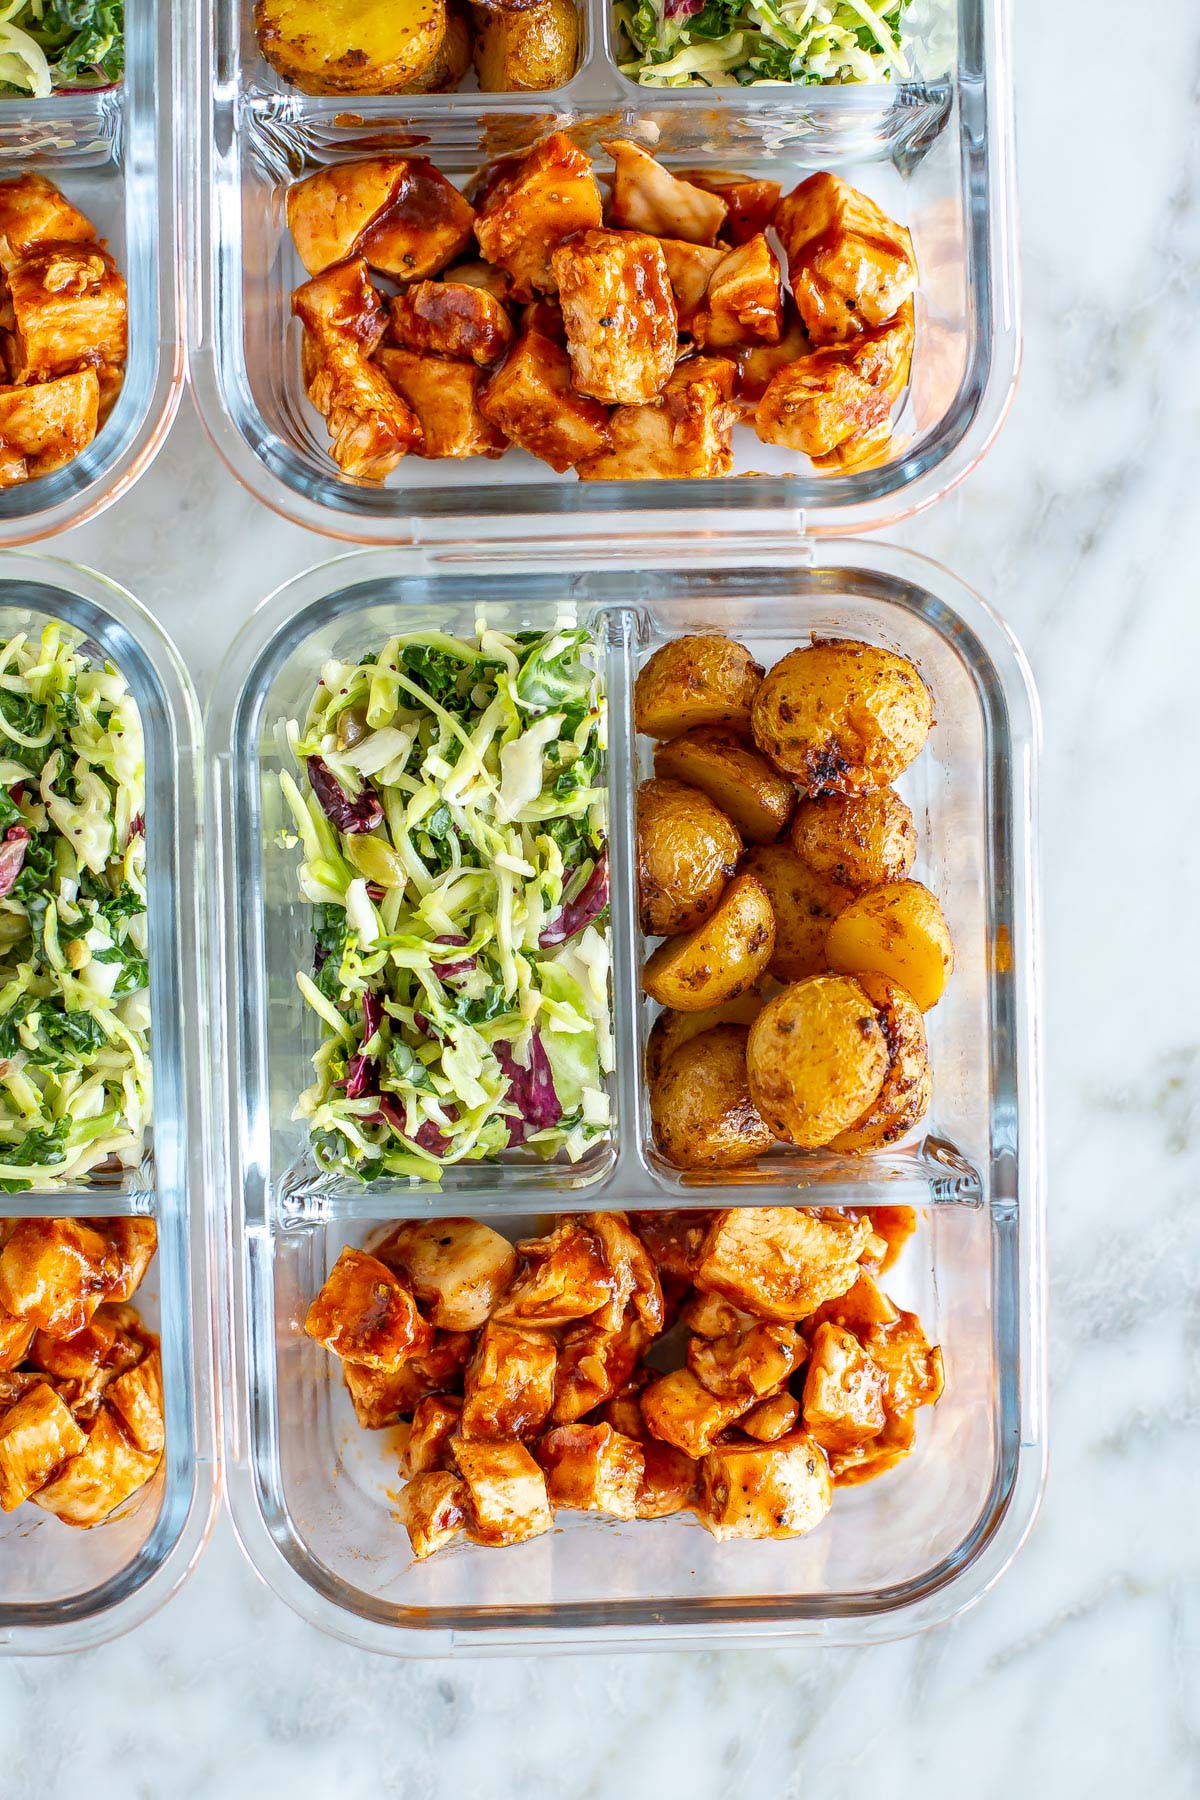 A close-up of a meal prep container with roasted baby potatoes, kale salad and baked BBQ chicken inside.